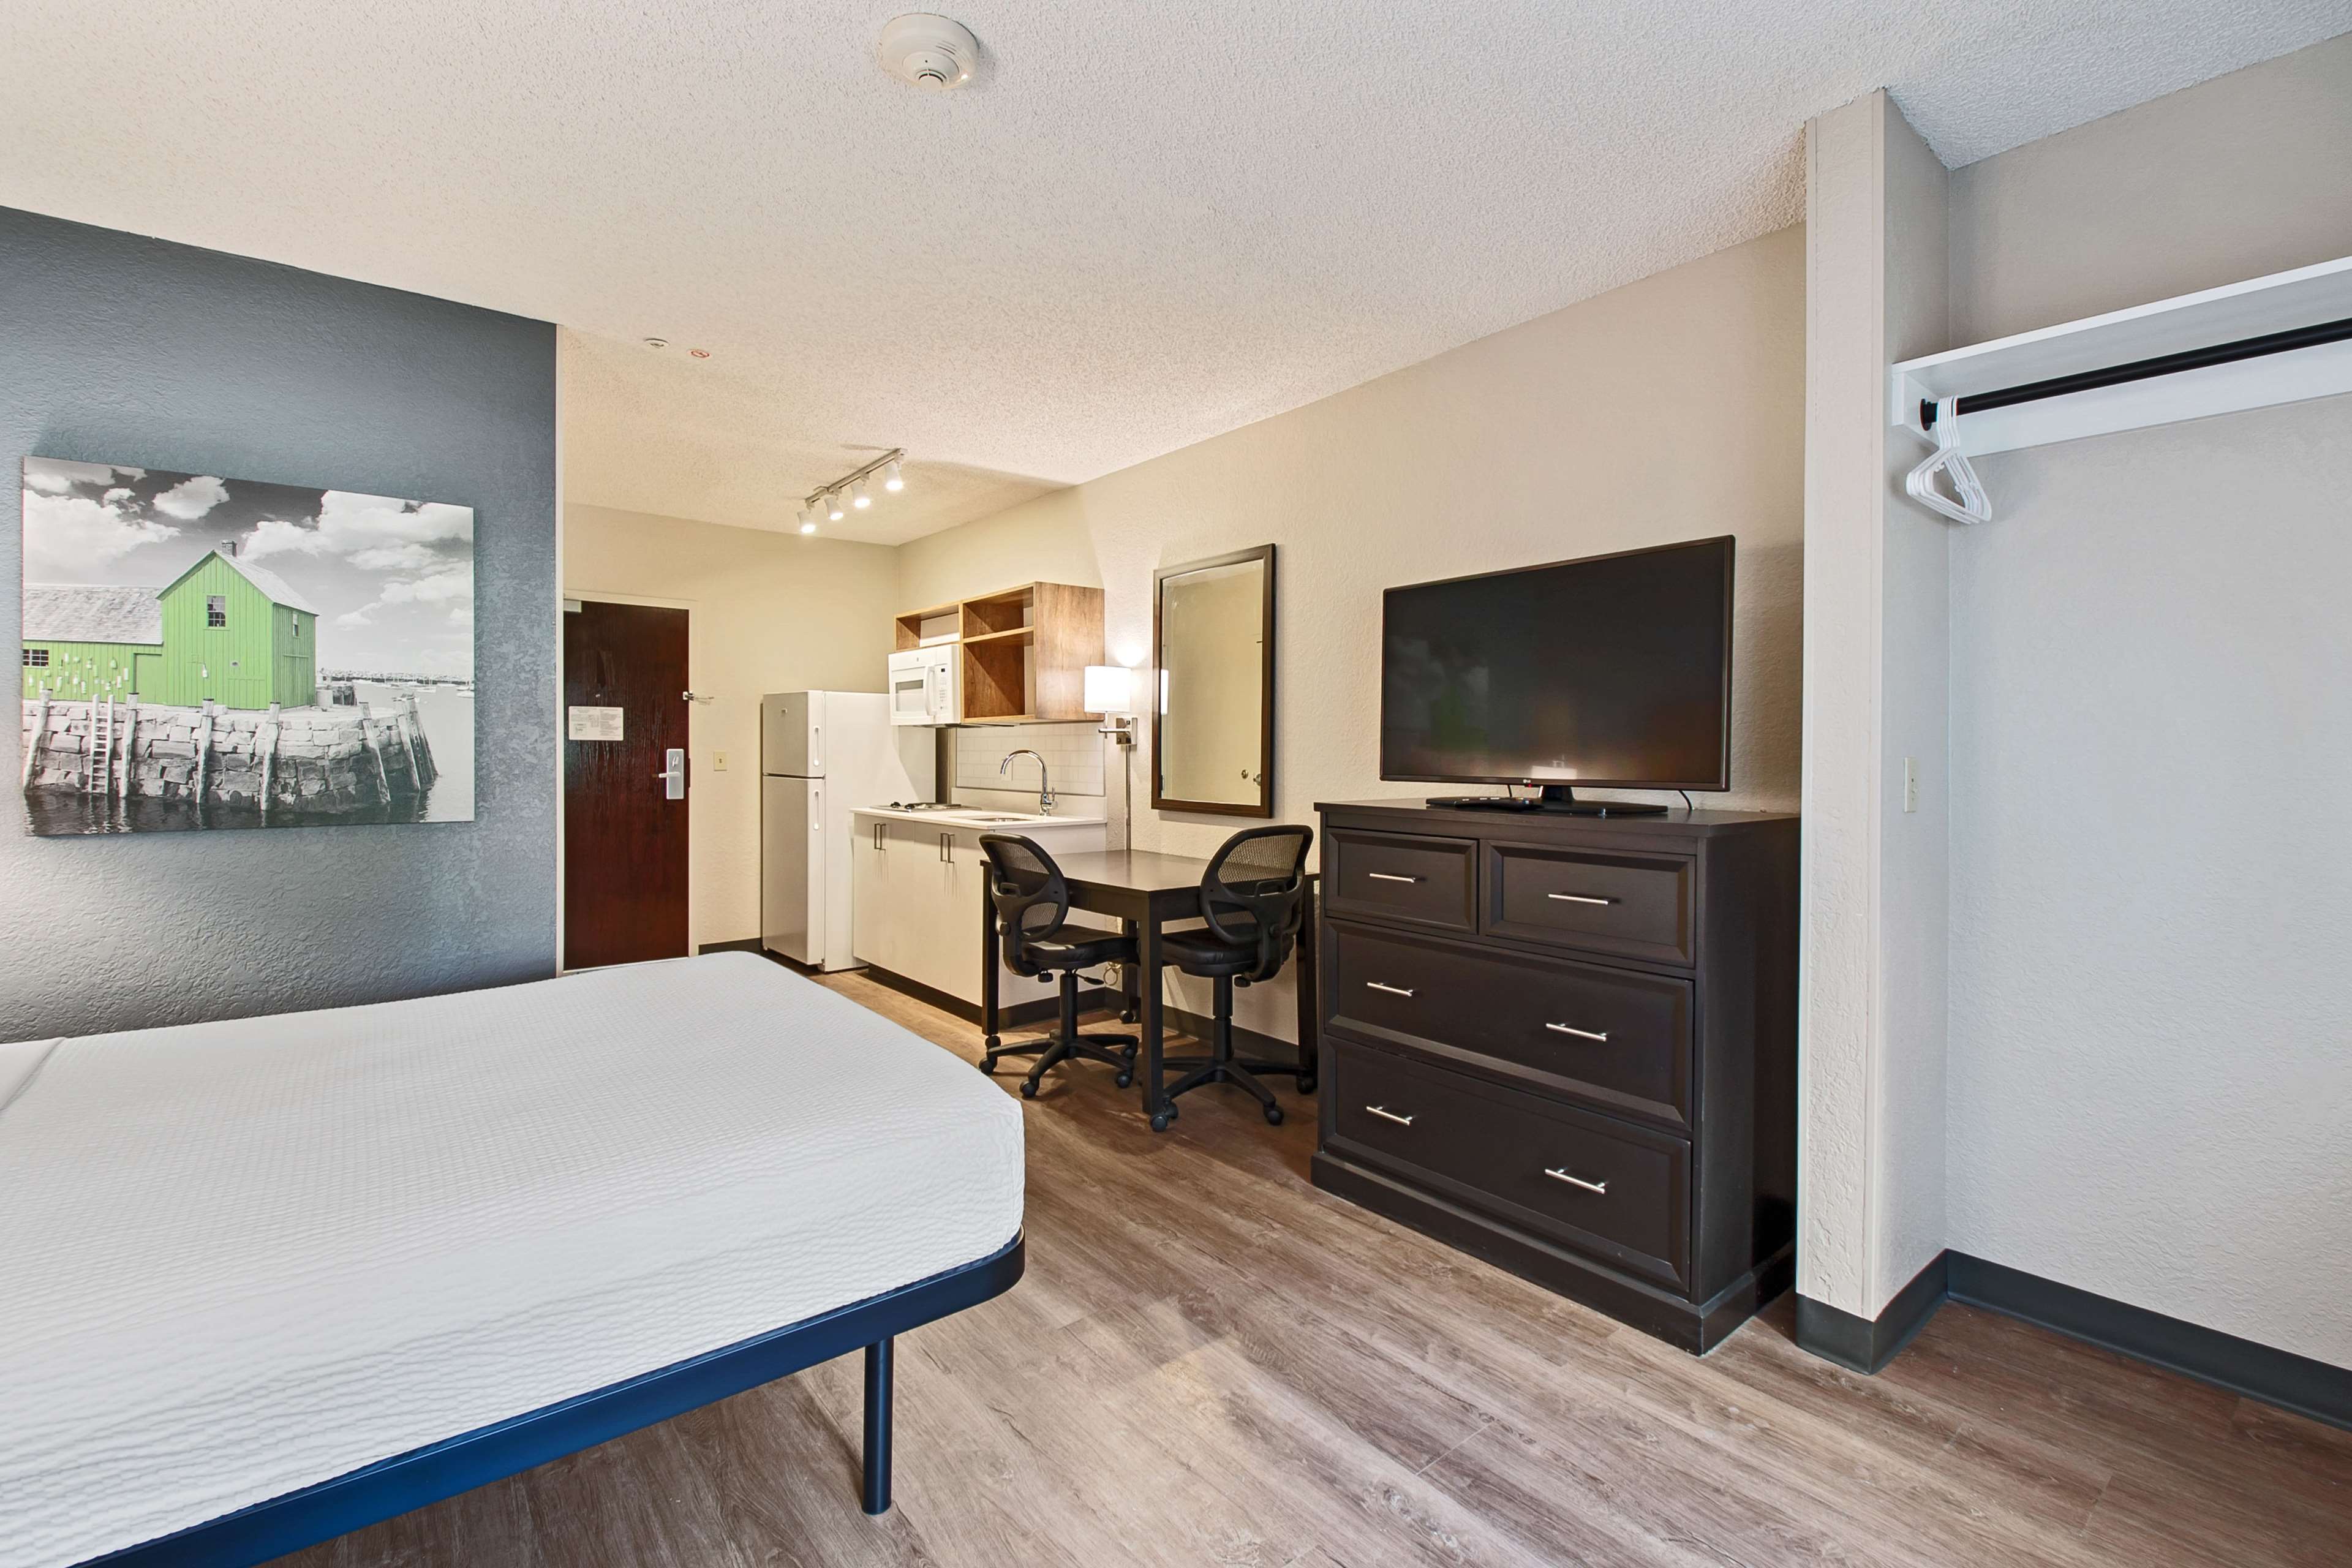 Extended Stay America Miami Airport Doral